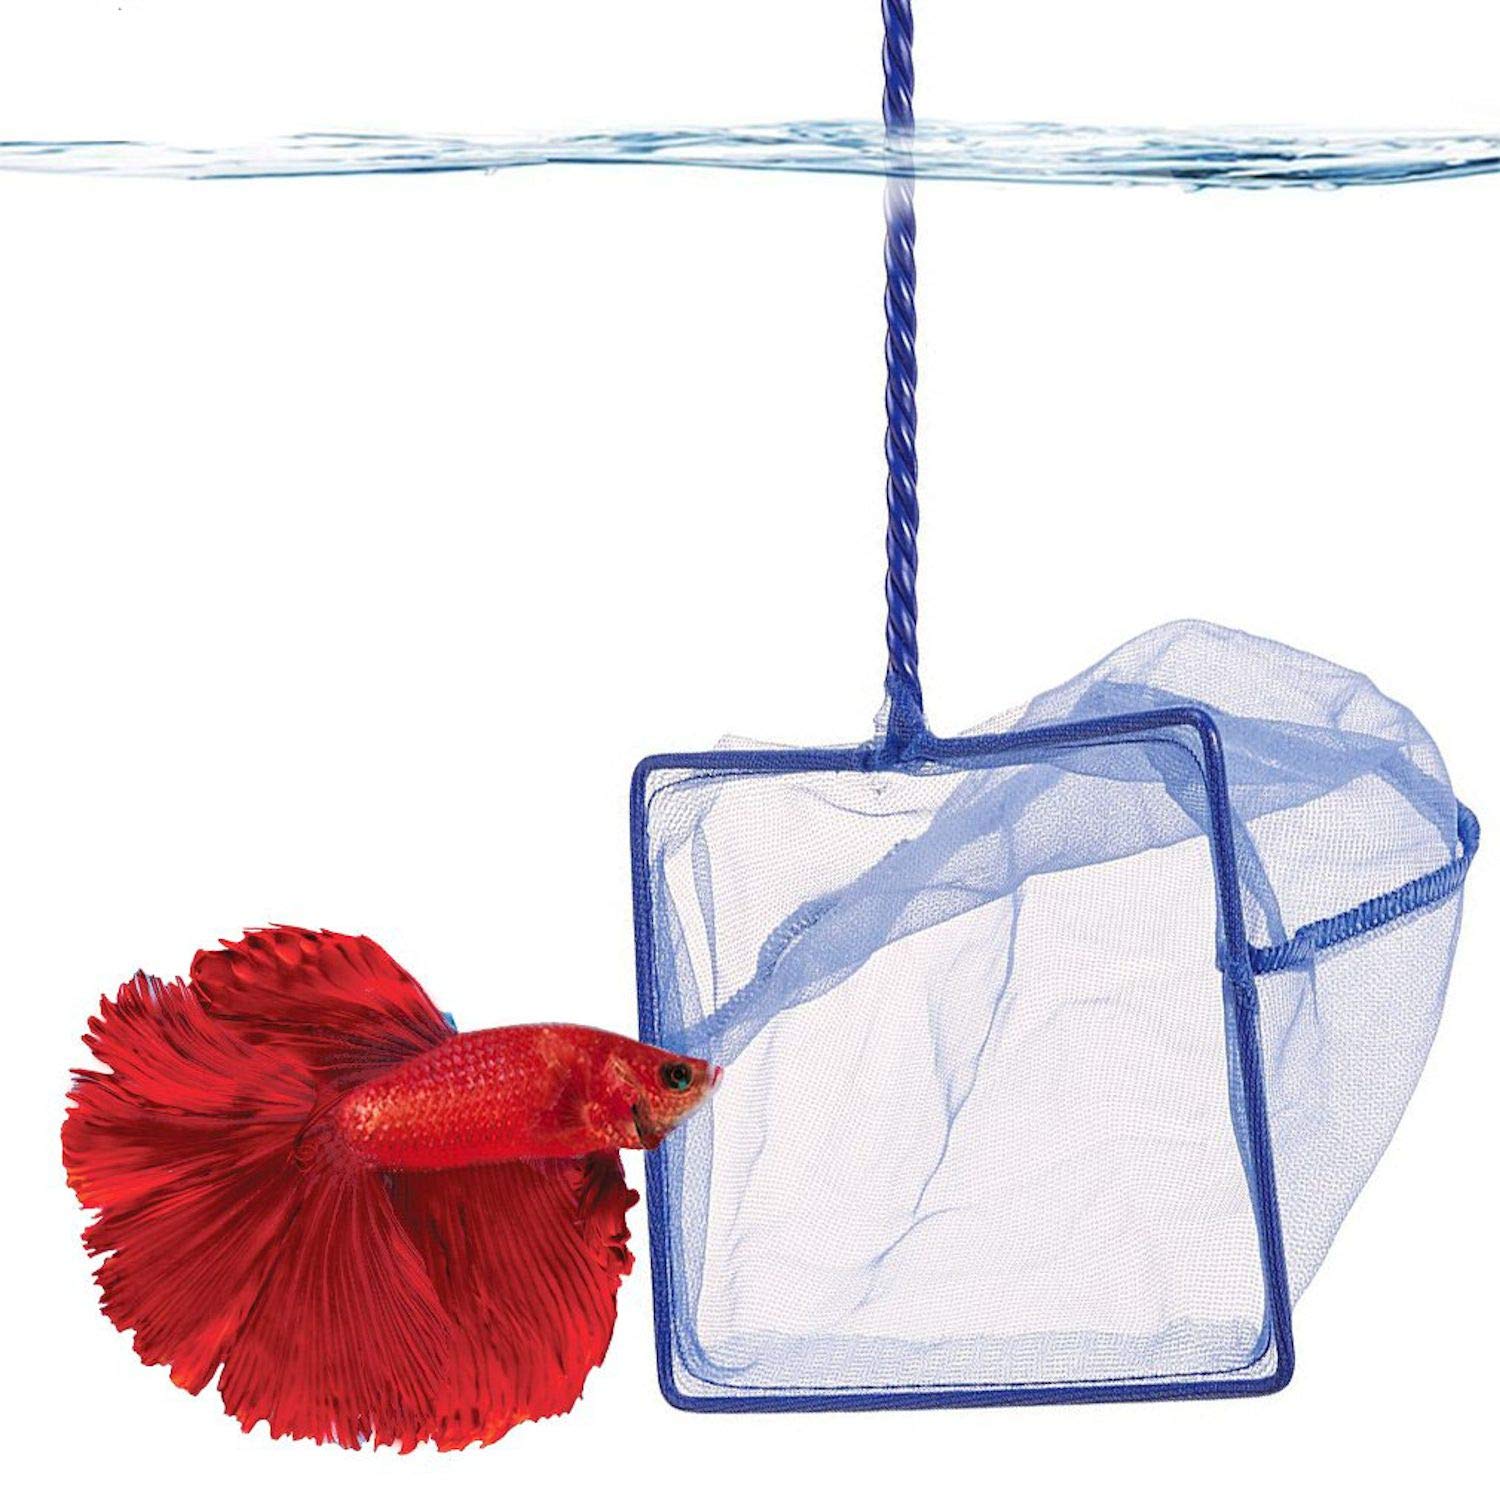 SunGrow Betta Fish Net, Protect Delicate Fin, 5x4 Inches with 11